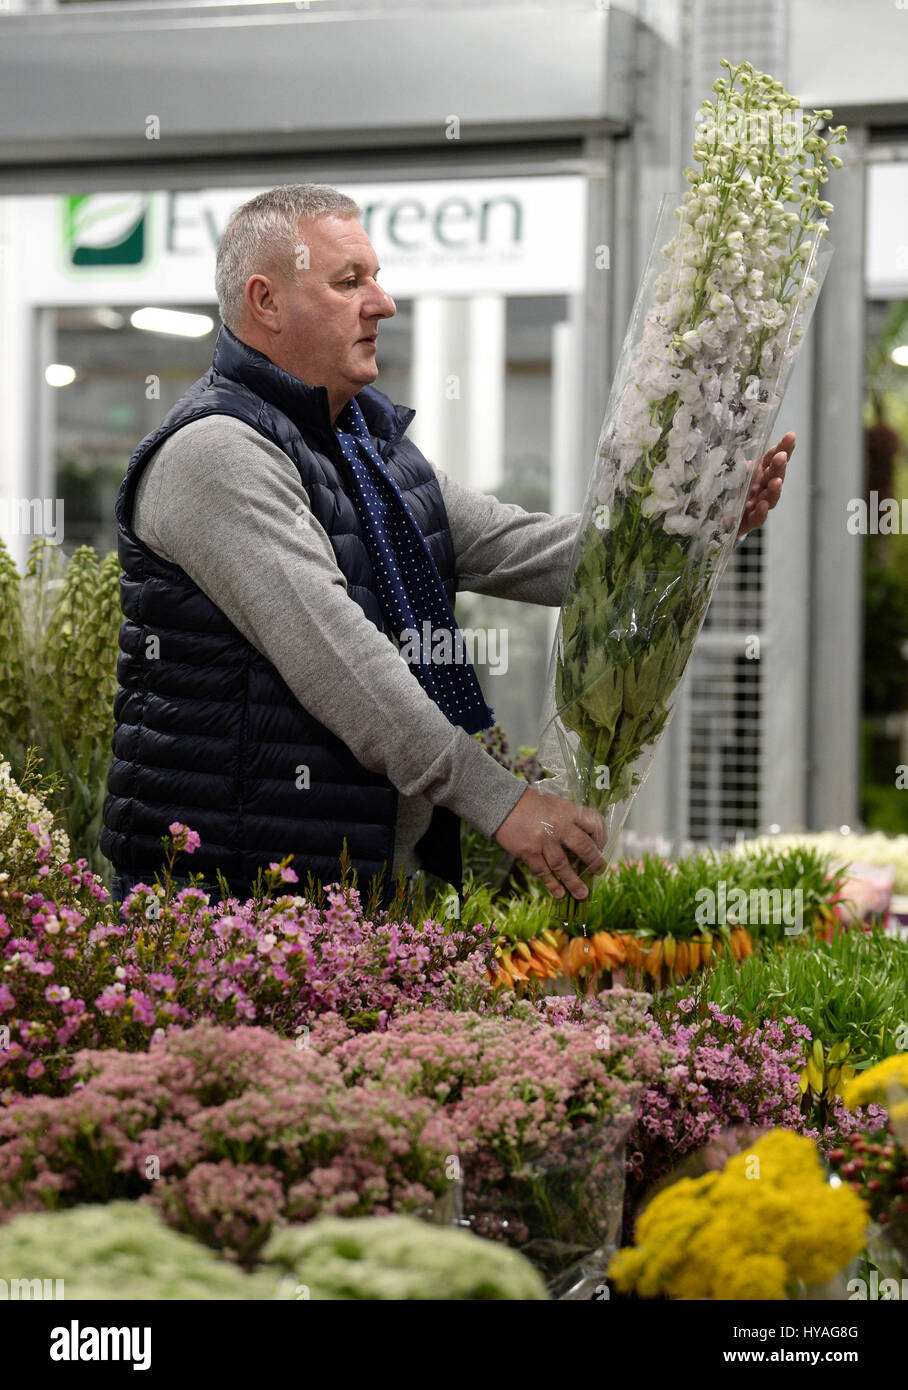 EDITORIAL USE ONLY Flower trader John Hardcastle prepares blooms at the Flower Market at New Covent Garden Market for the first time today at the opening of the new Nine Elms Lane site, London. Stock Photo